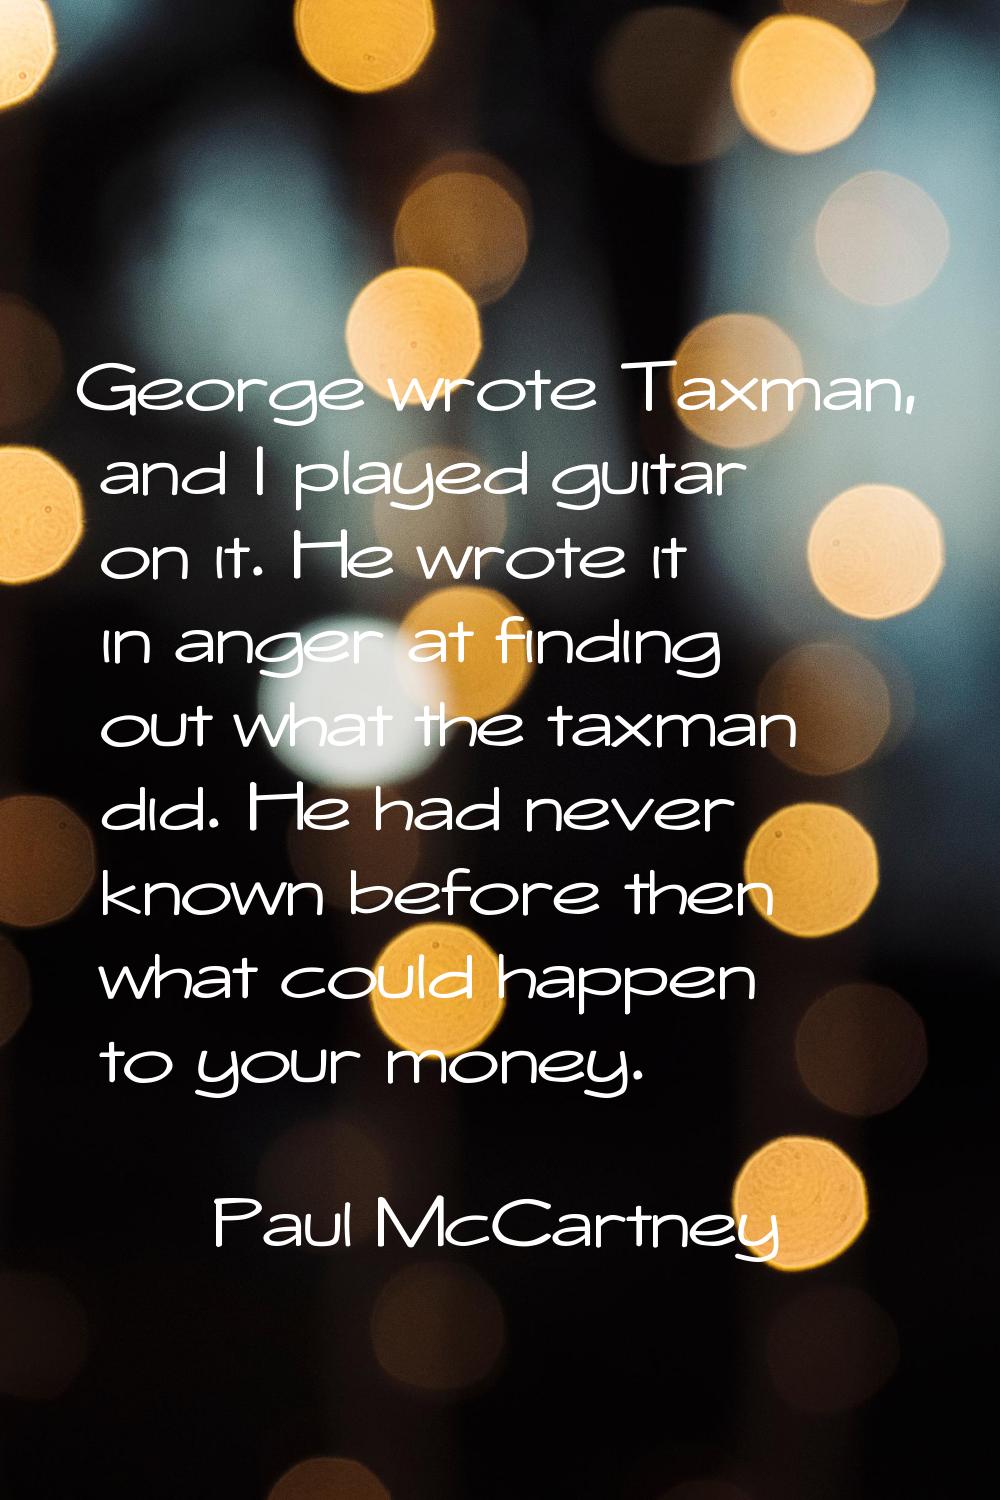 George wrote Taxman, and I played guitar on it. He wrote it in anger at finding out what the taxman